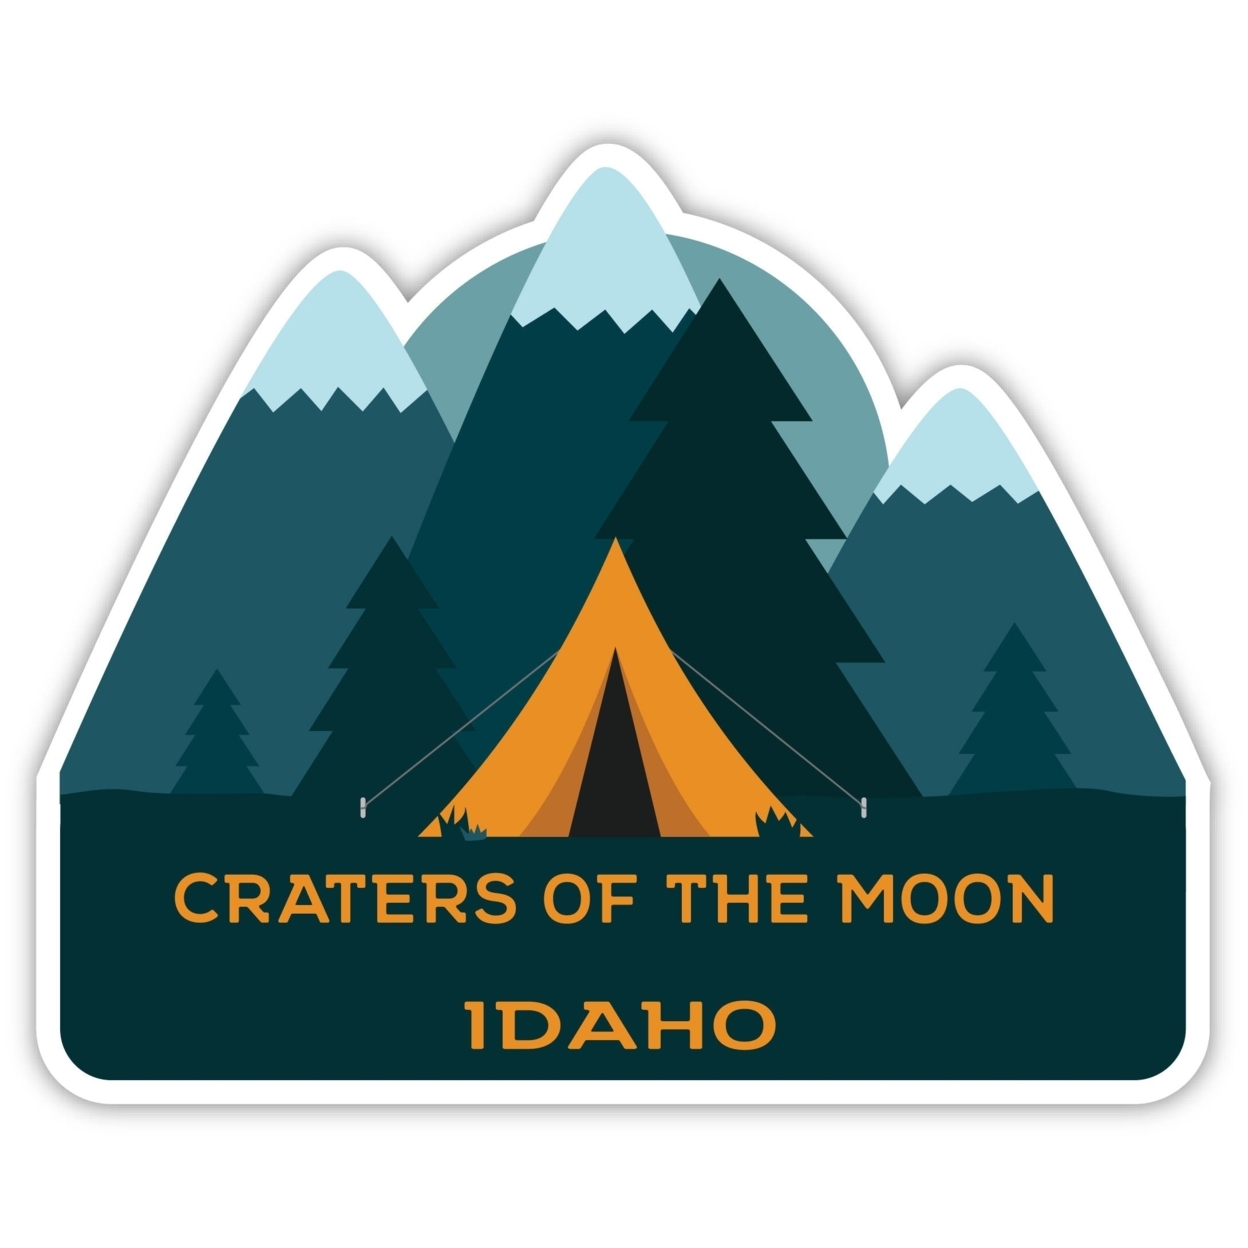 Craters Of The Moon Idaho Souvenir Decorative Stickers (Choose Theme And Size) - Single Unit, 2-Inch, Bear